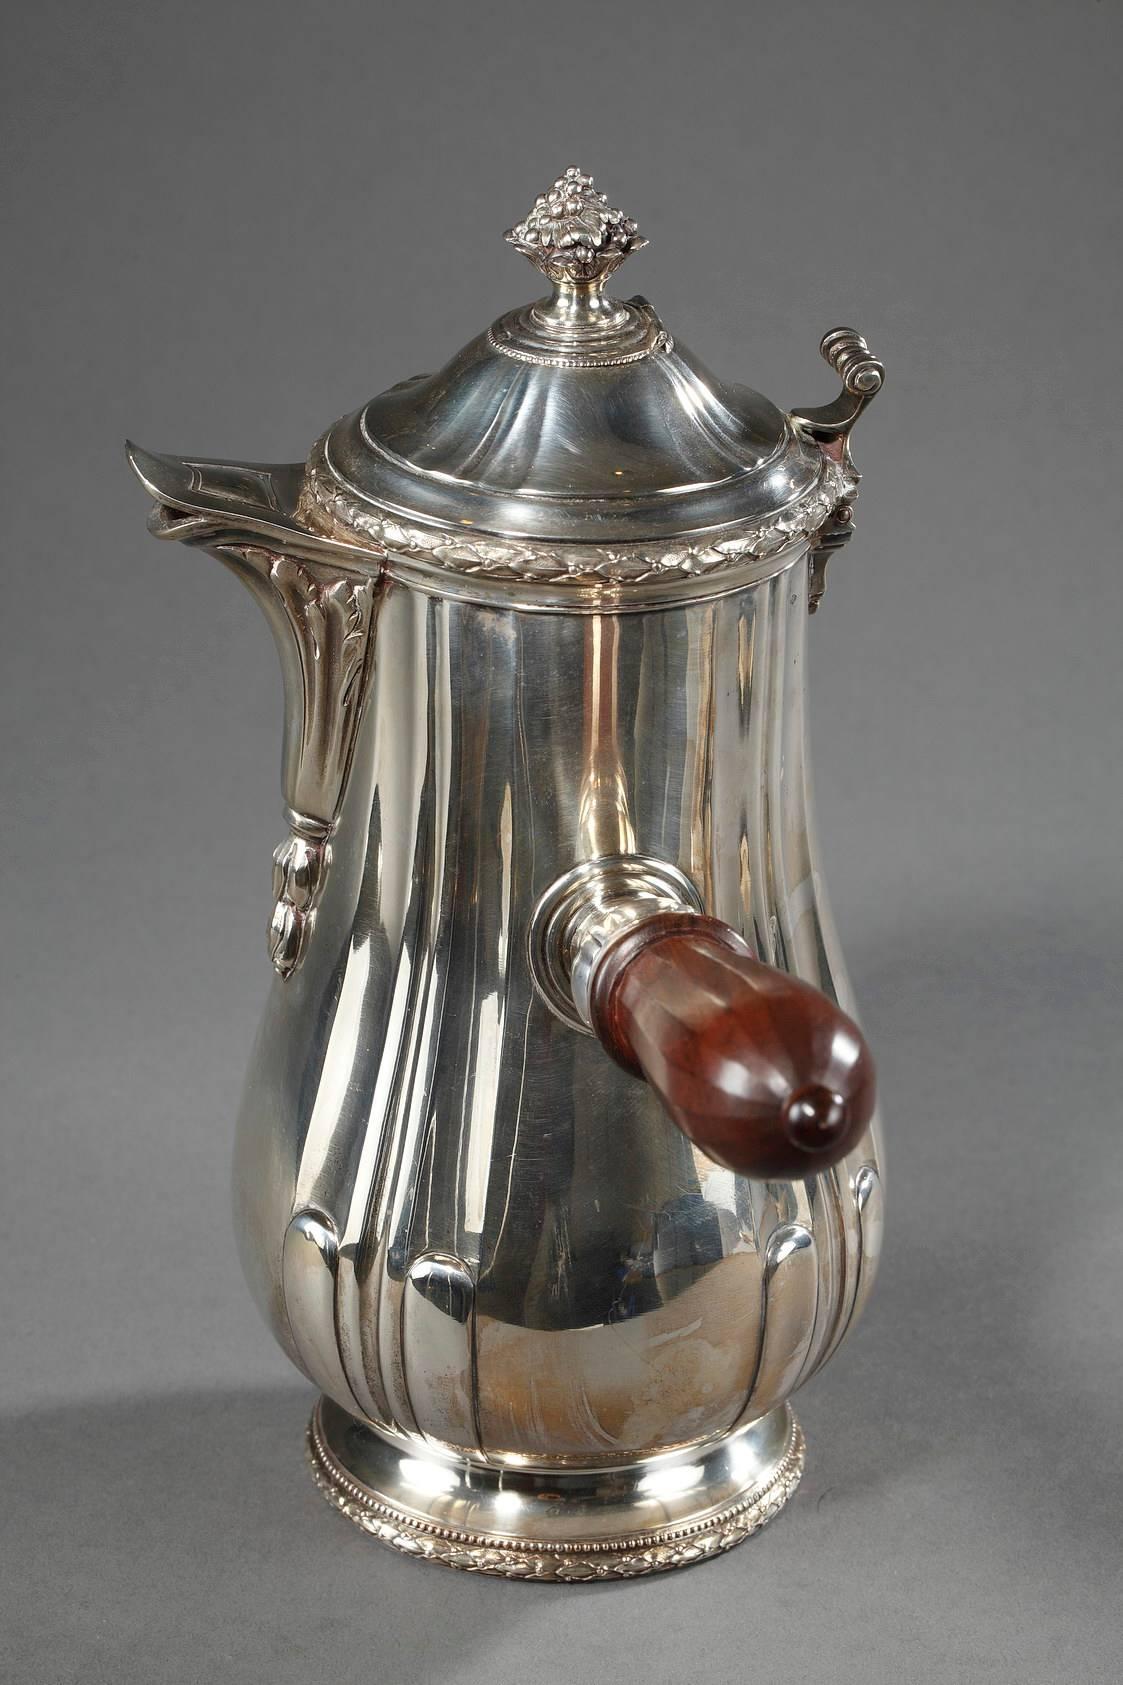 Silver hot chocolate pot decorated with laurel garlands and gadroons. The lid is topped with a fruit bowl, and a wood handle is attached to the side. French Minerve silver mark. Silversmith: Puiforcat in Paris, 


circa 1930
Dimensions: W 4.7 in, D